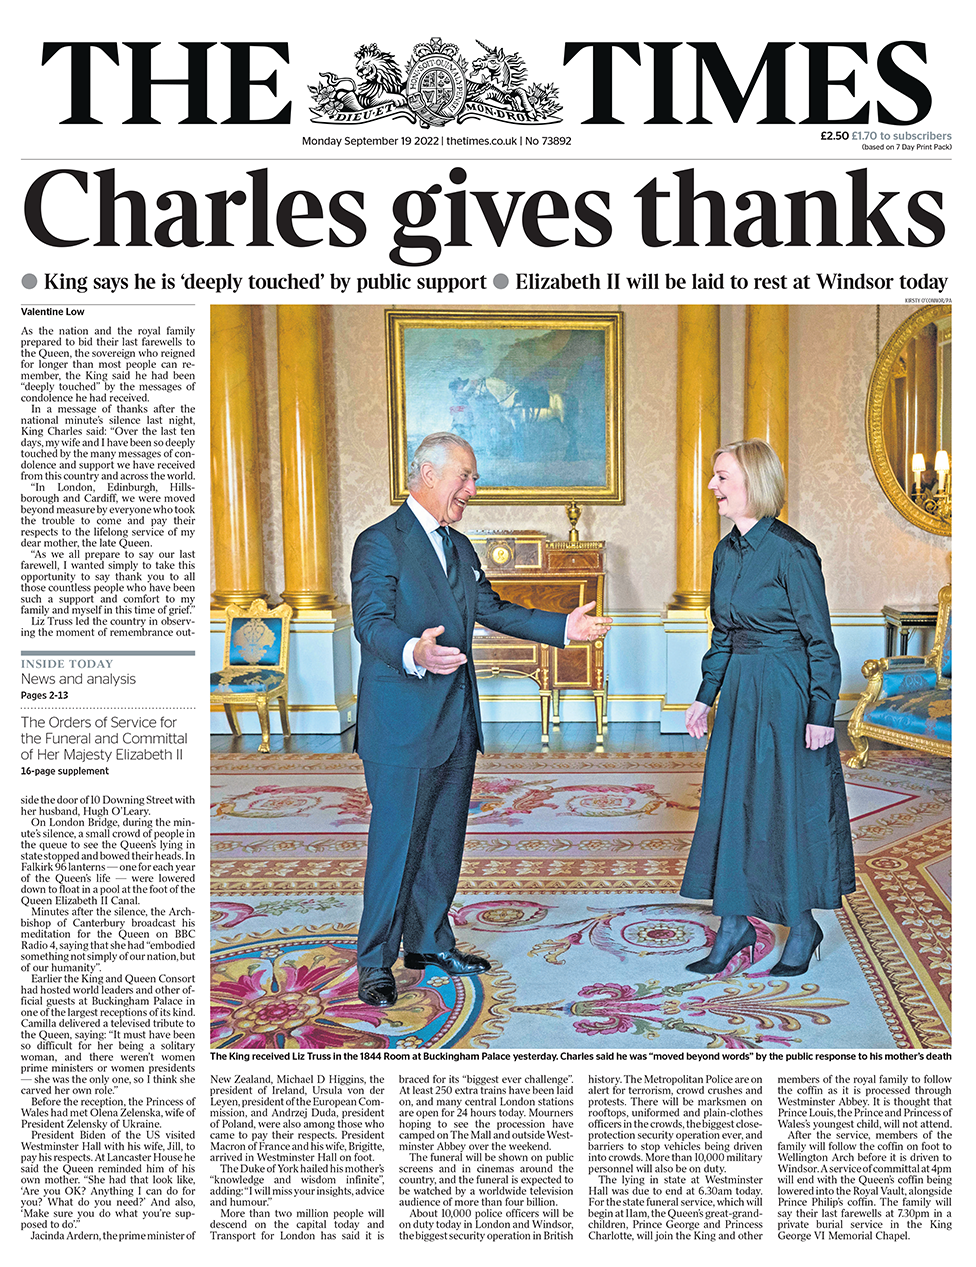 The Times front page